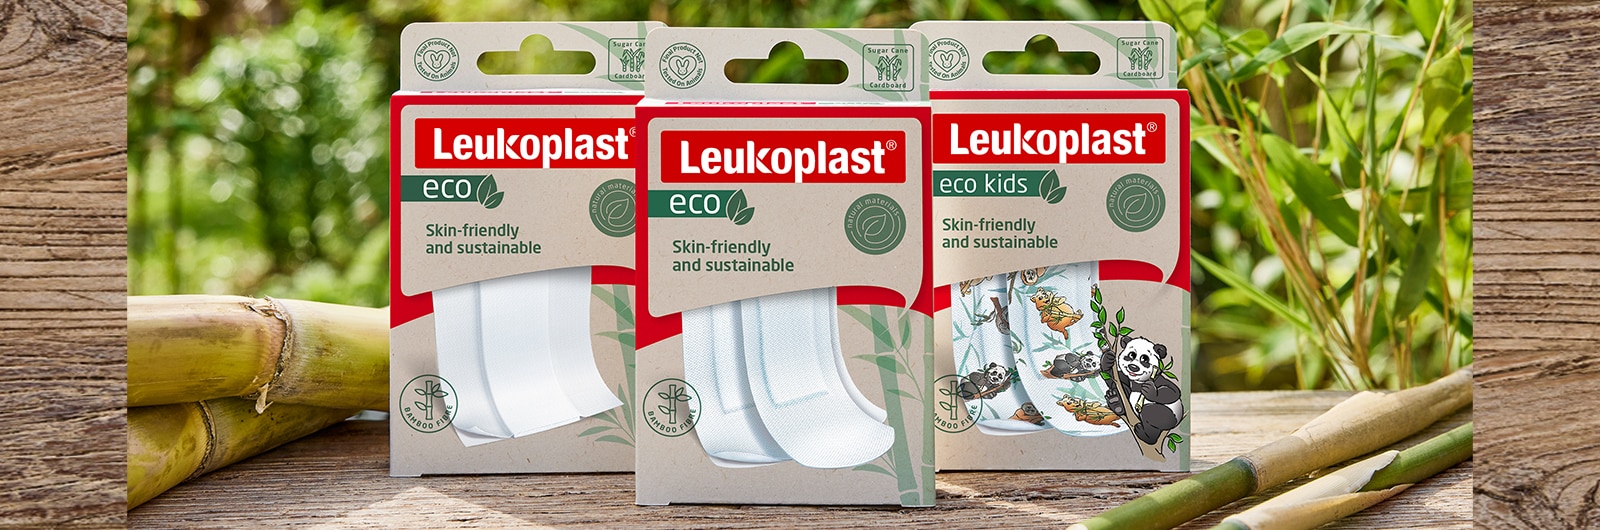 Image showing the Leukoplast eco packagings dressing length, strips and kids edition